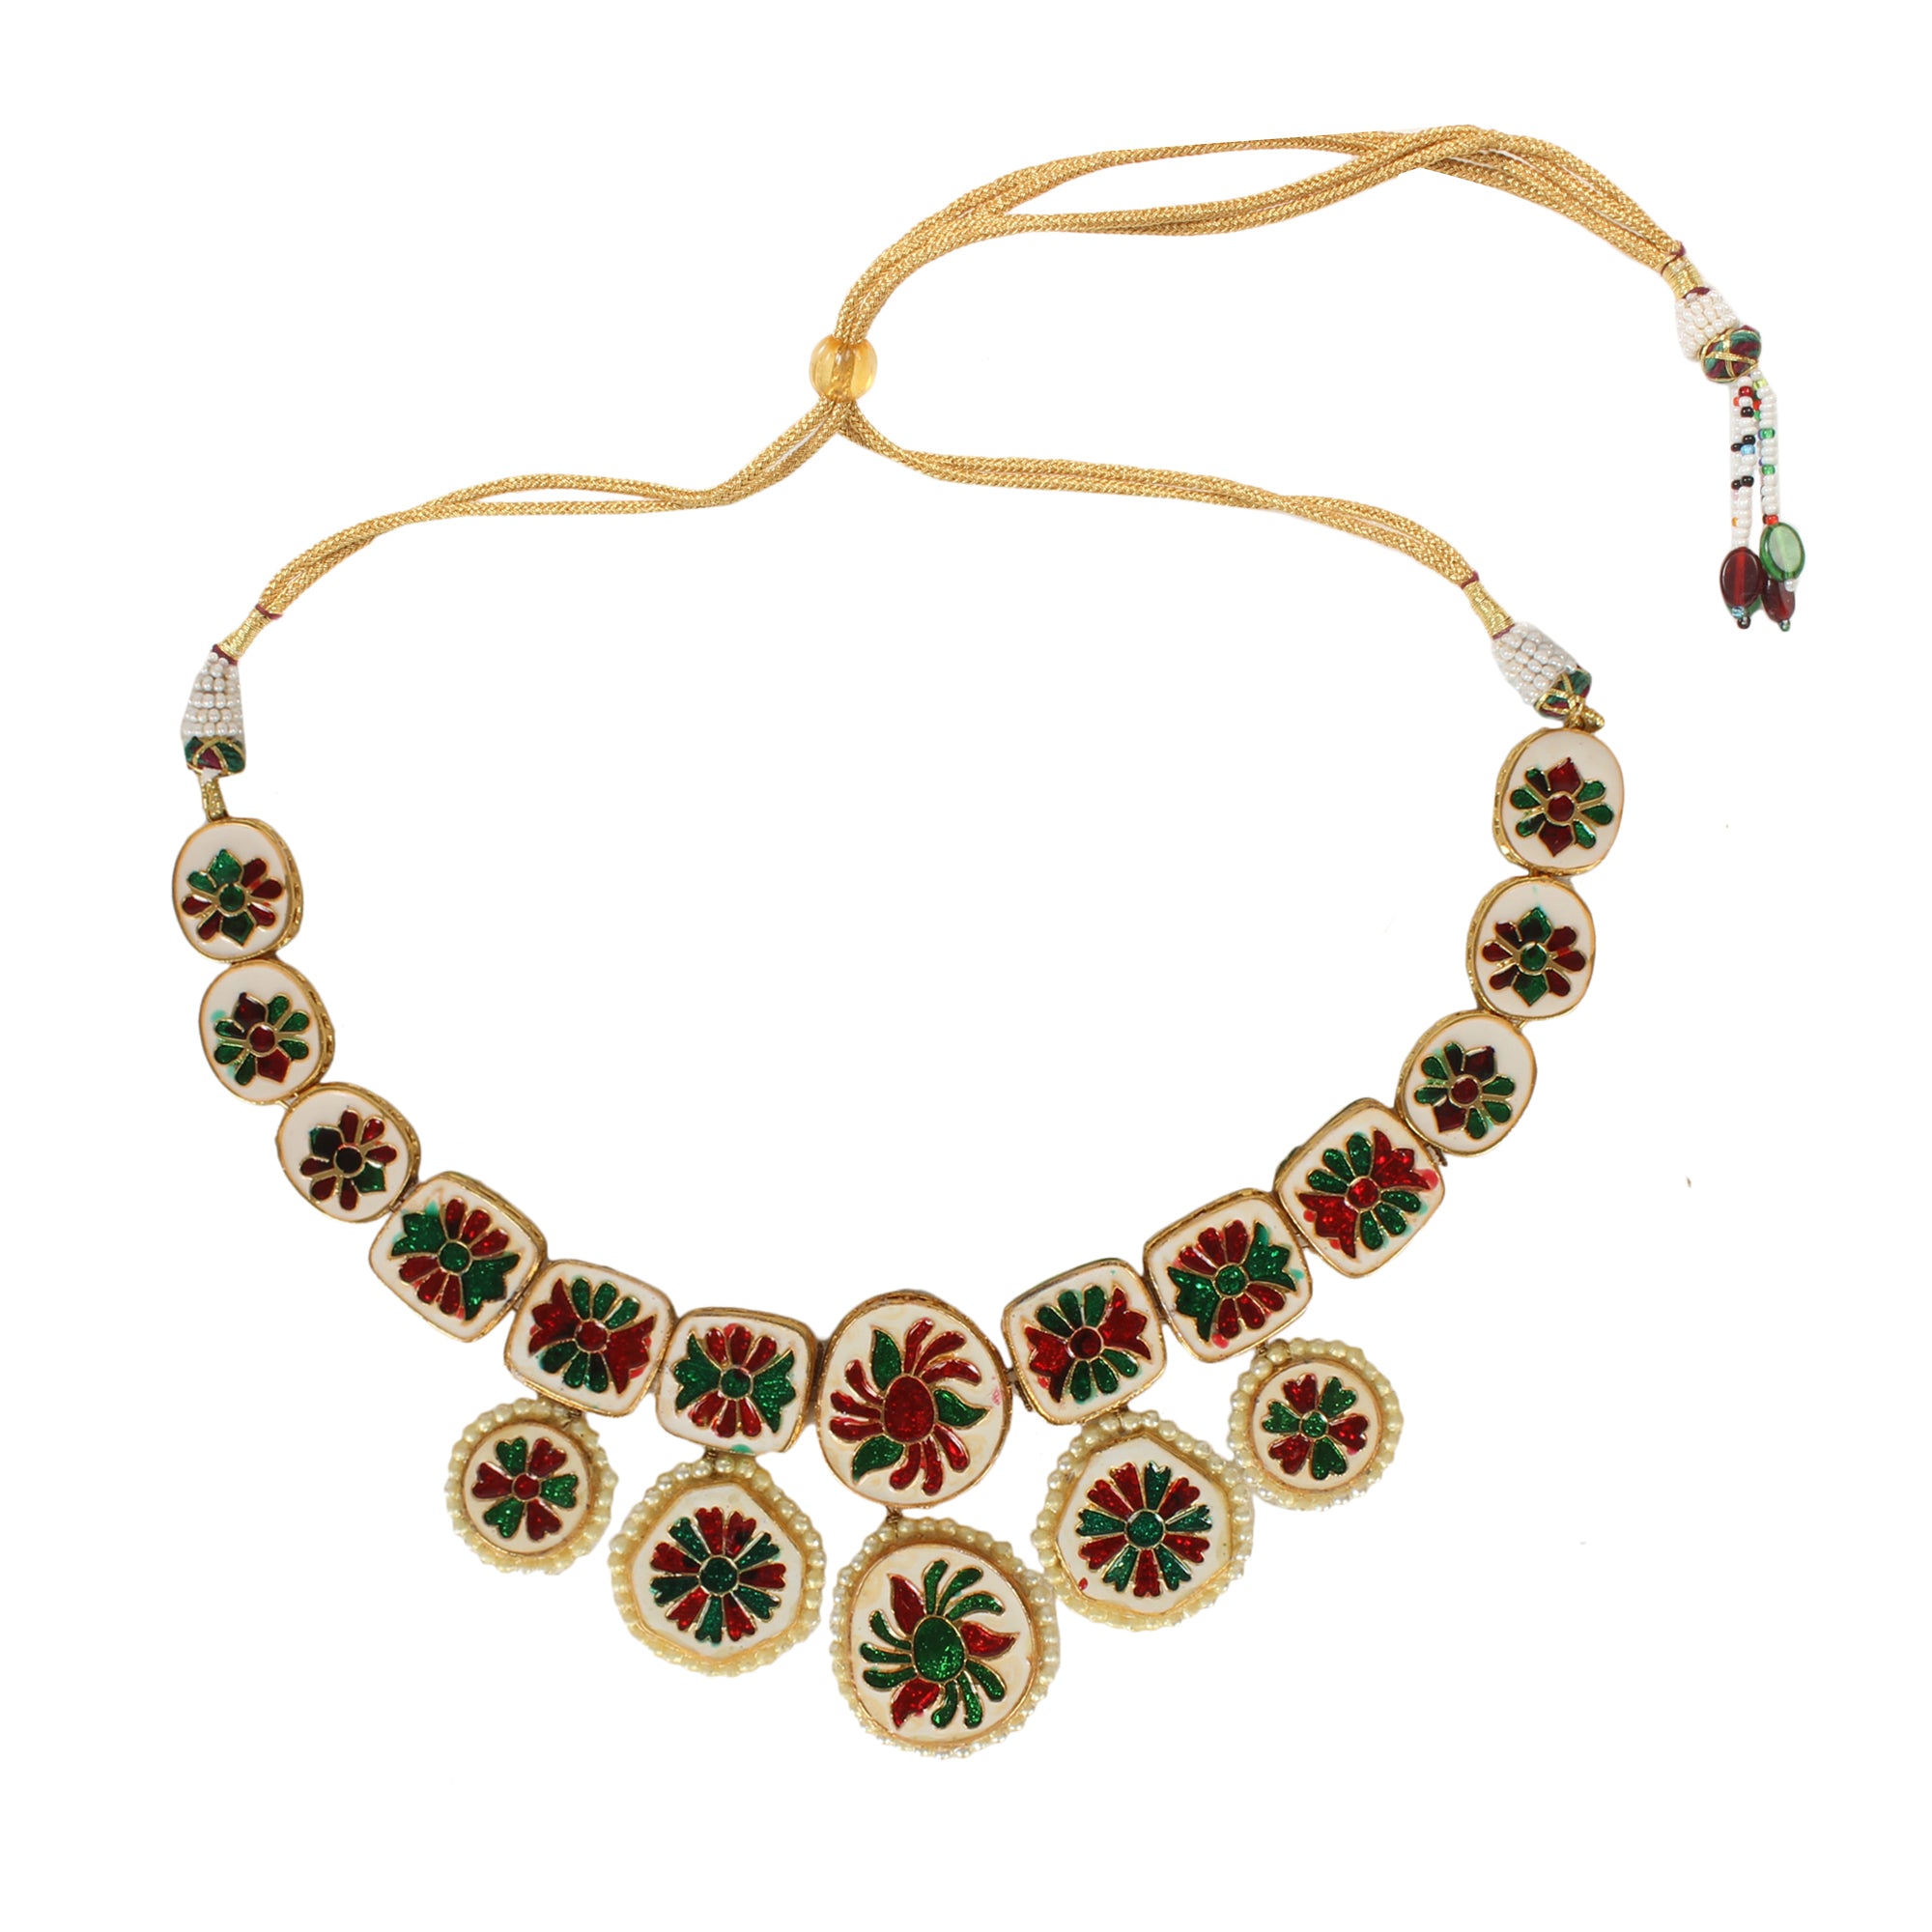 Kundan Inspired Necklace with earrings